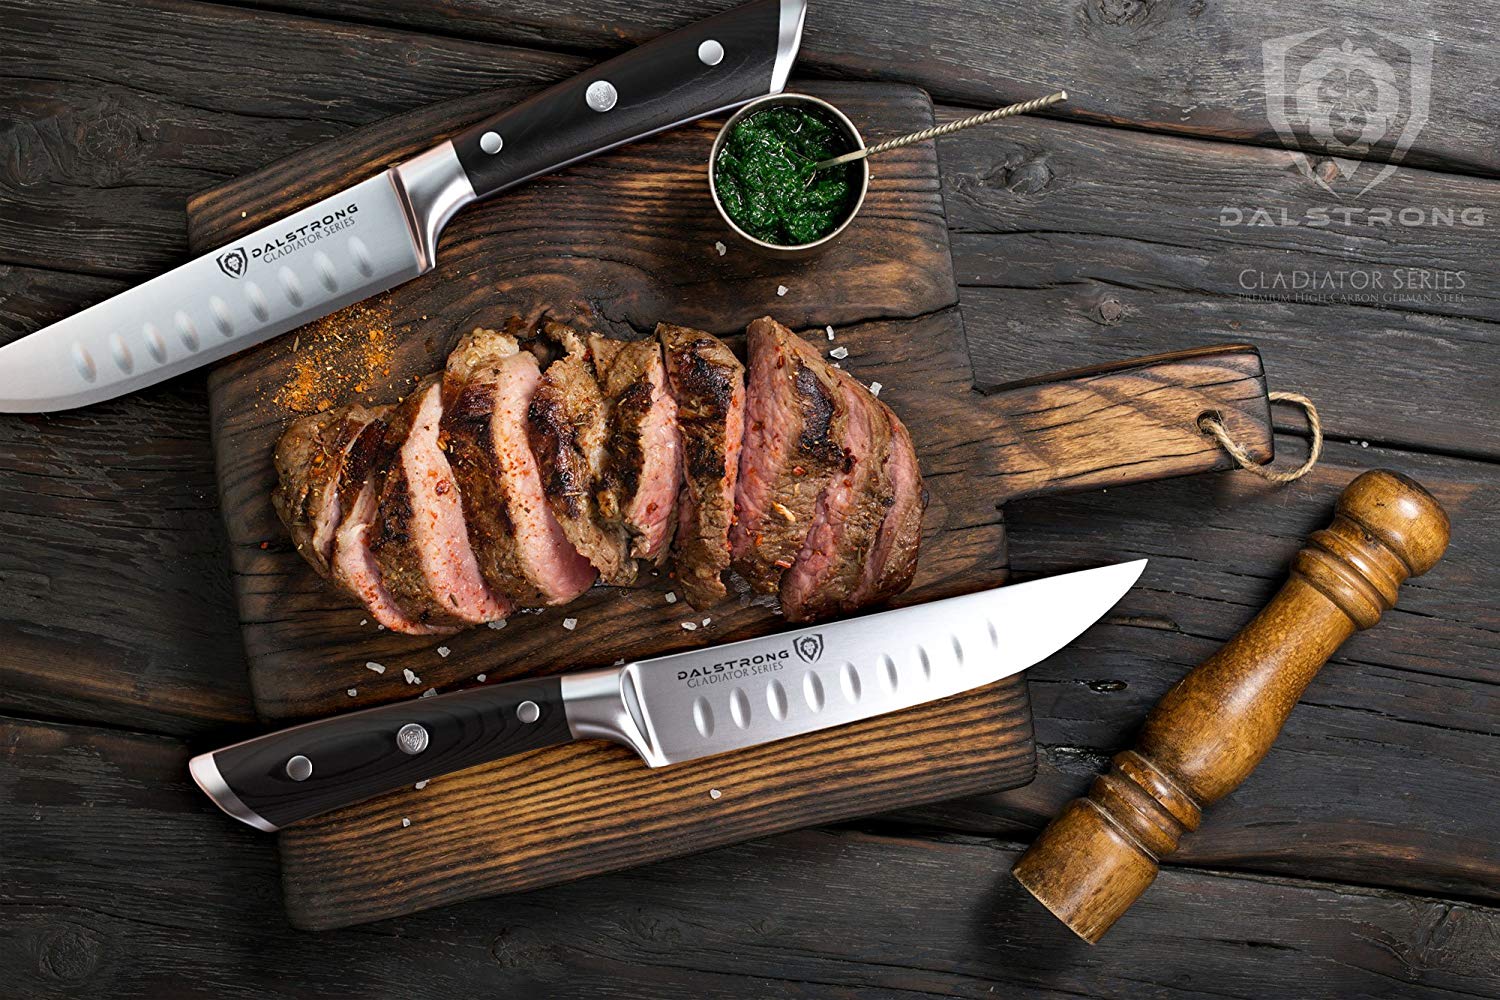 Steak Knife Sets Top 10 Best Review on Amazon